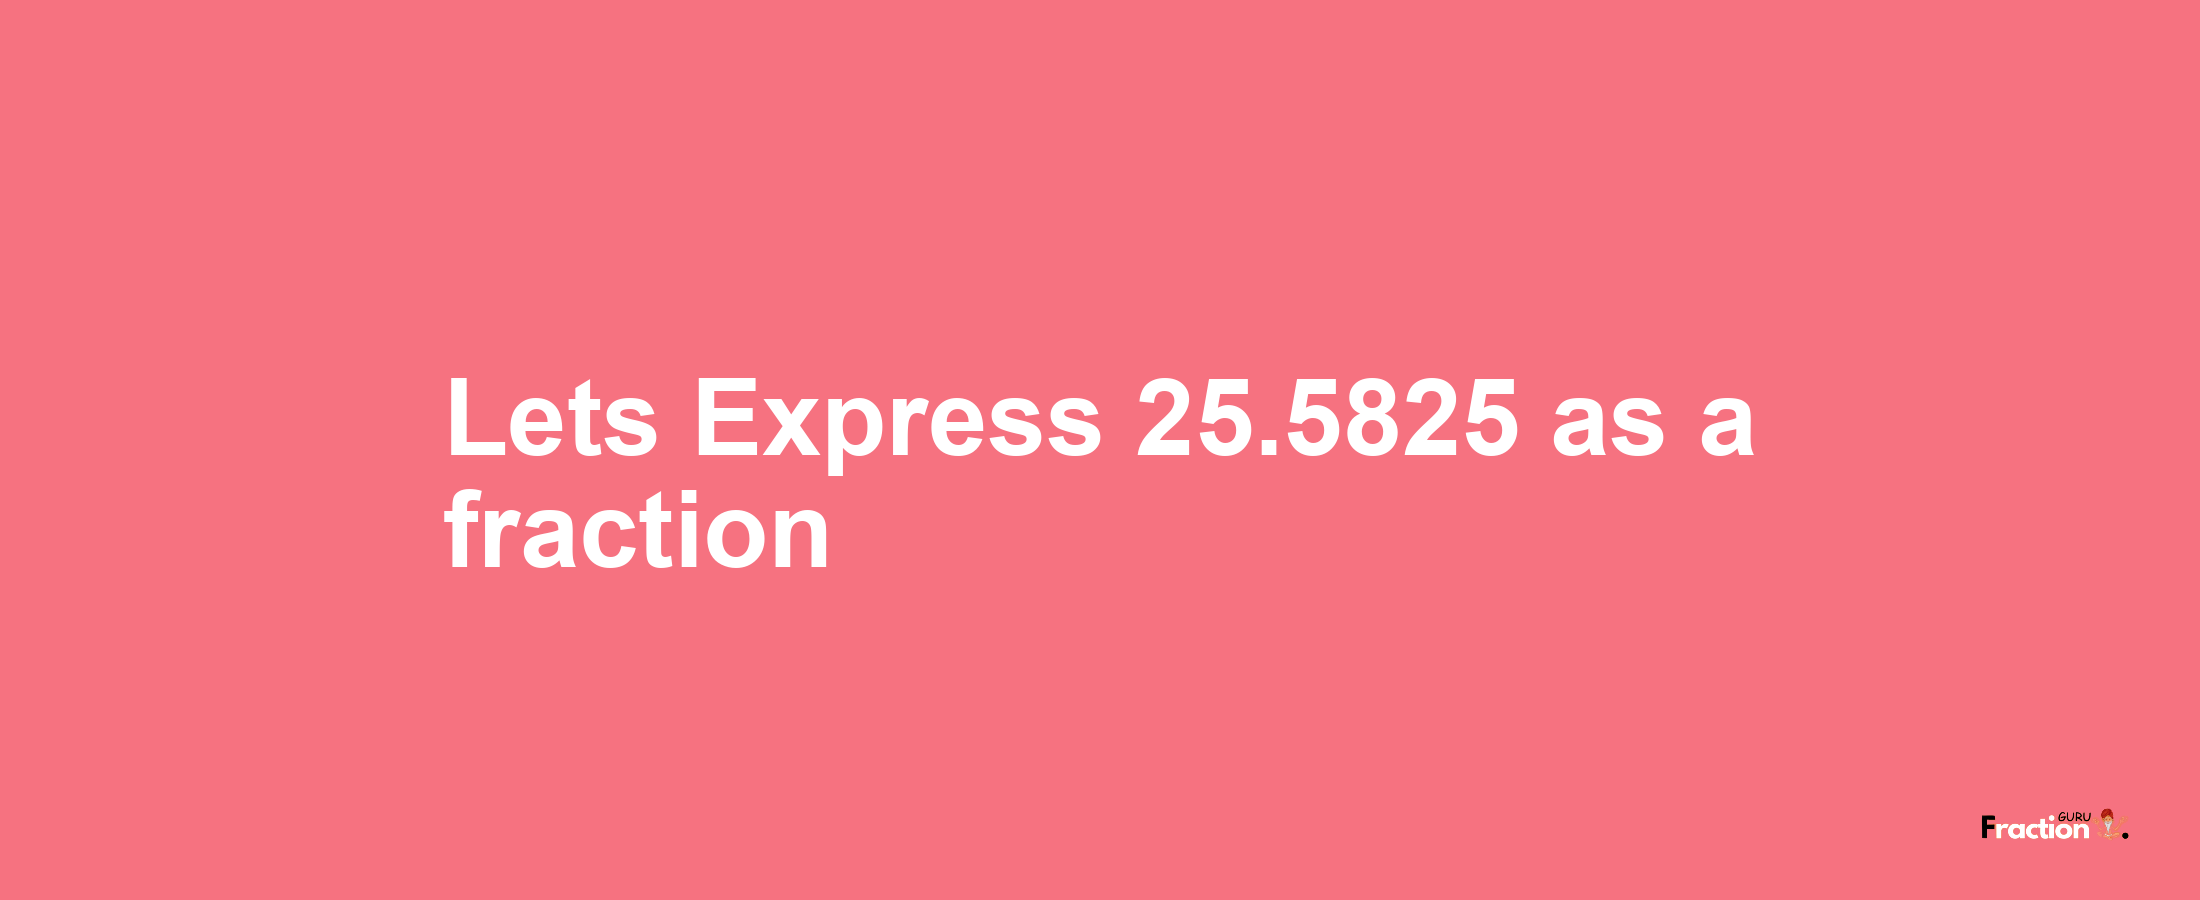 Lets Express 25.5825 as afraction